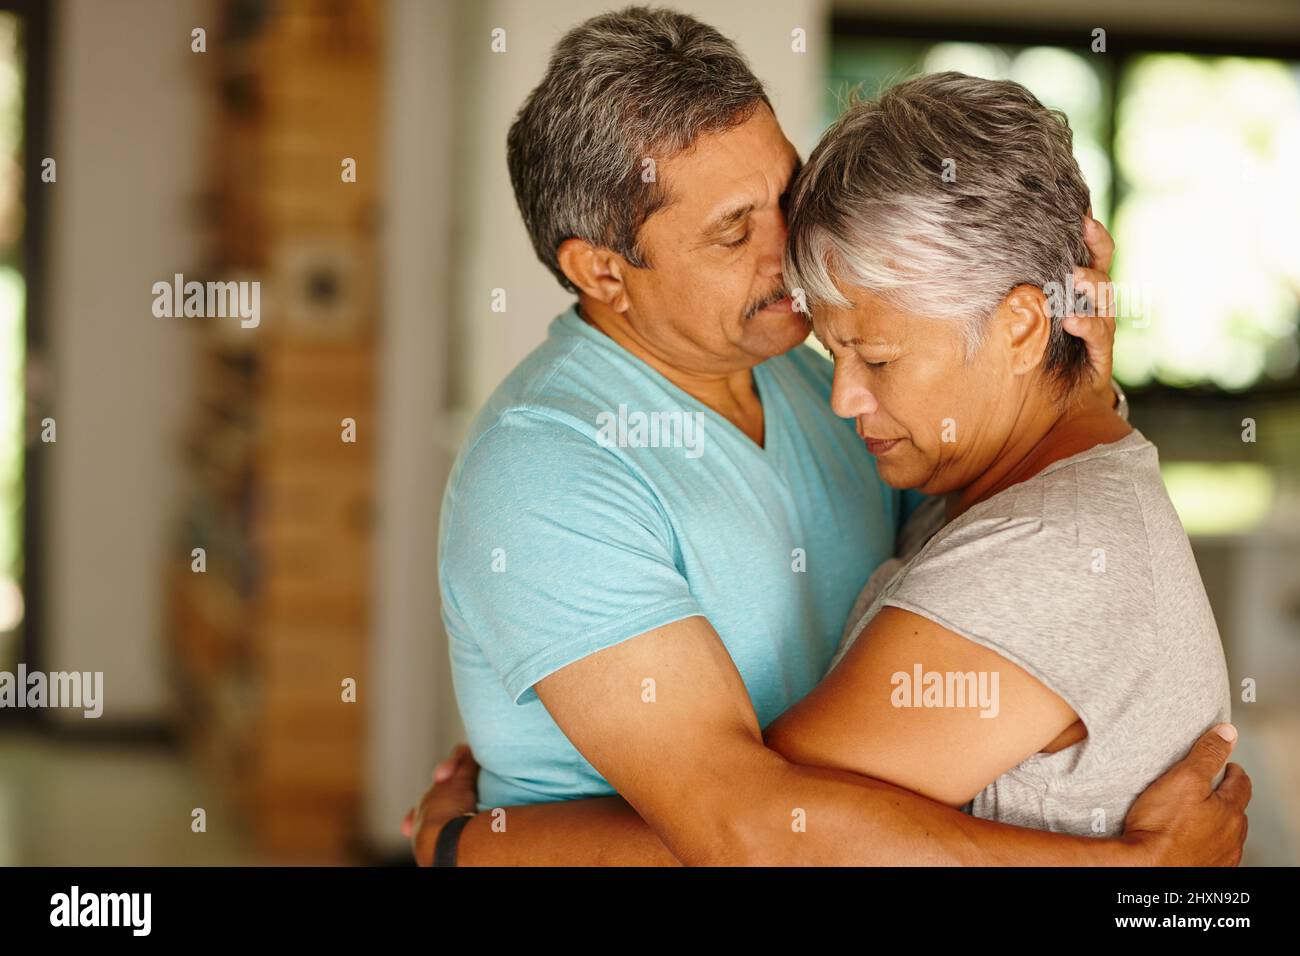 Ive always got you.... Shot of a mature couple embracing at home. Stock Photo